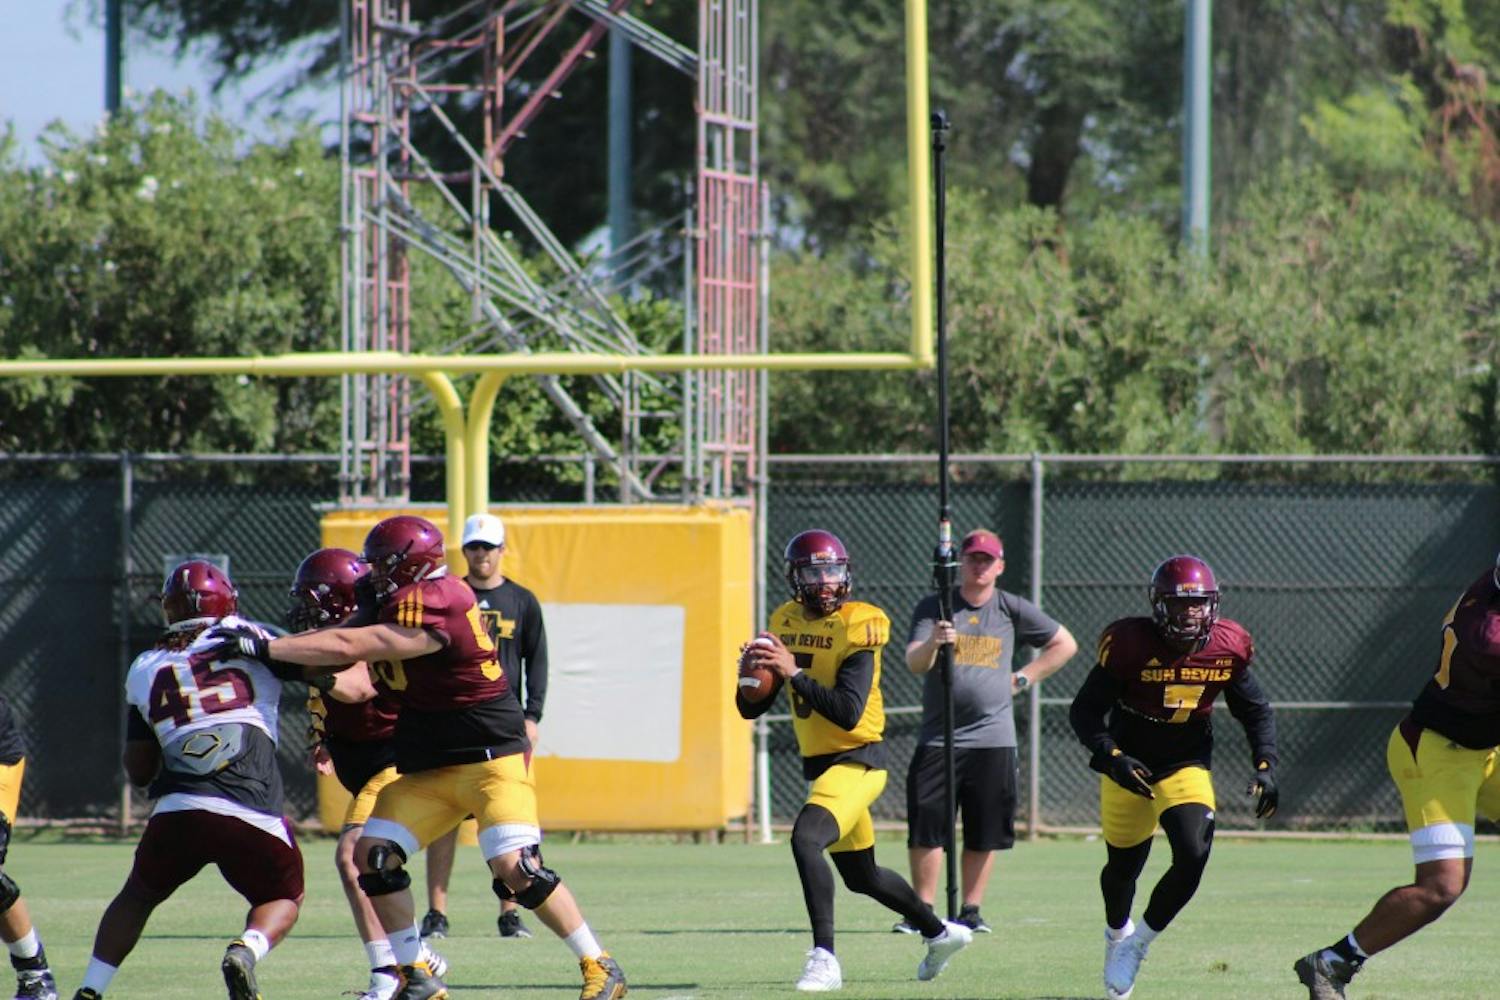 ASU redshirt sophomore quarterback Manny Wilkins drops back to pass during a morning&nbsp;practice on&nbsp;Tuesday, August 16th, 2016 at the Kajikawa Practice Fields in Tempe. &nbsp;